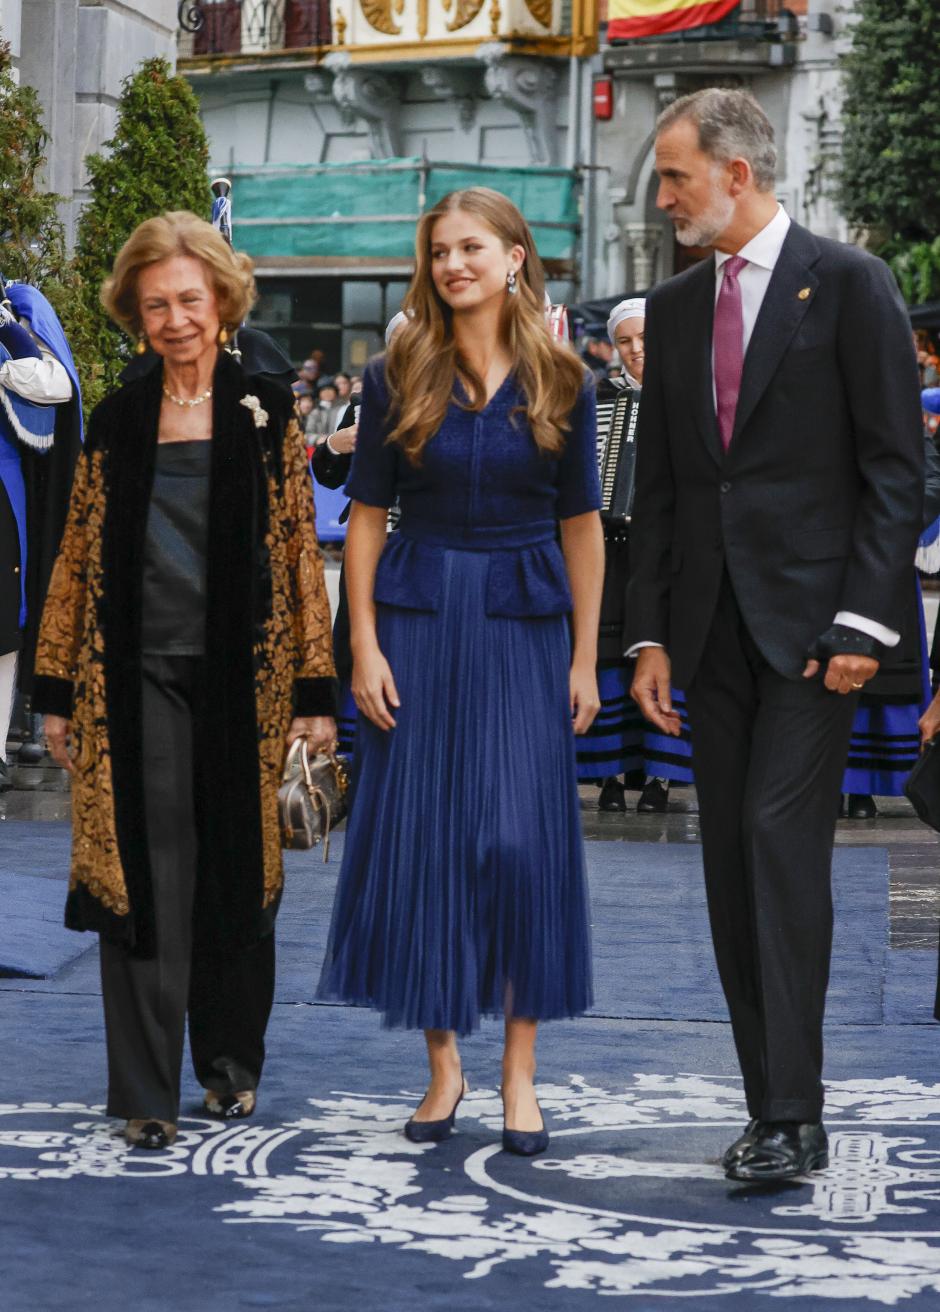 Spanish King Felipe and Leonor de Borbon with Sofia de Borbon during the Princess of Asturias Awards 2023 in Oviedo, on Friday 20 October 2023.